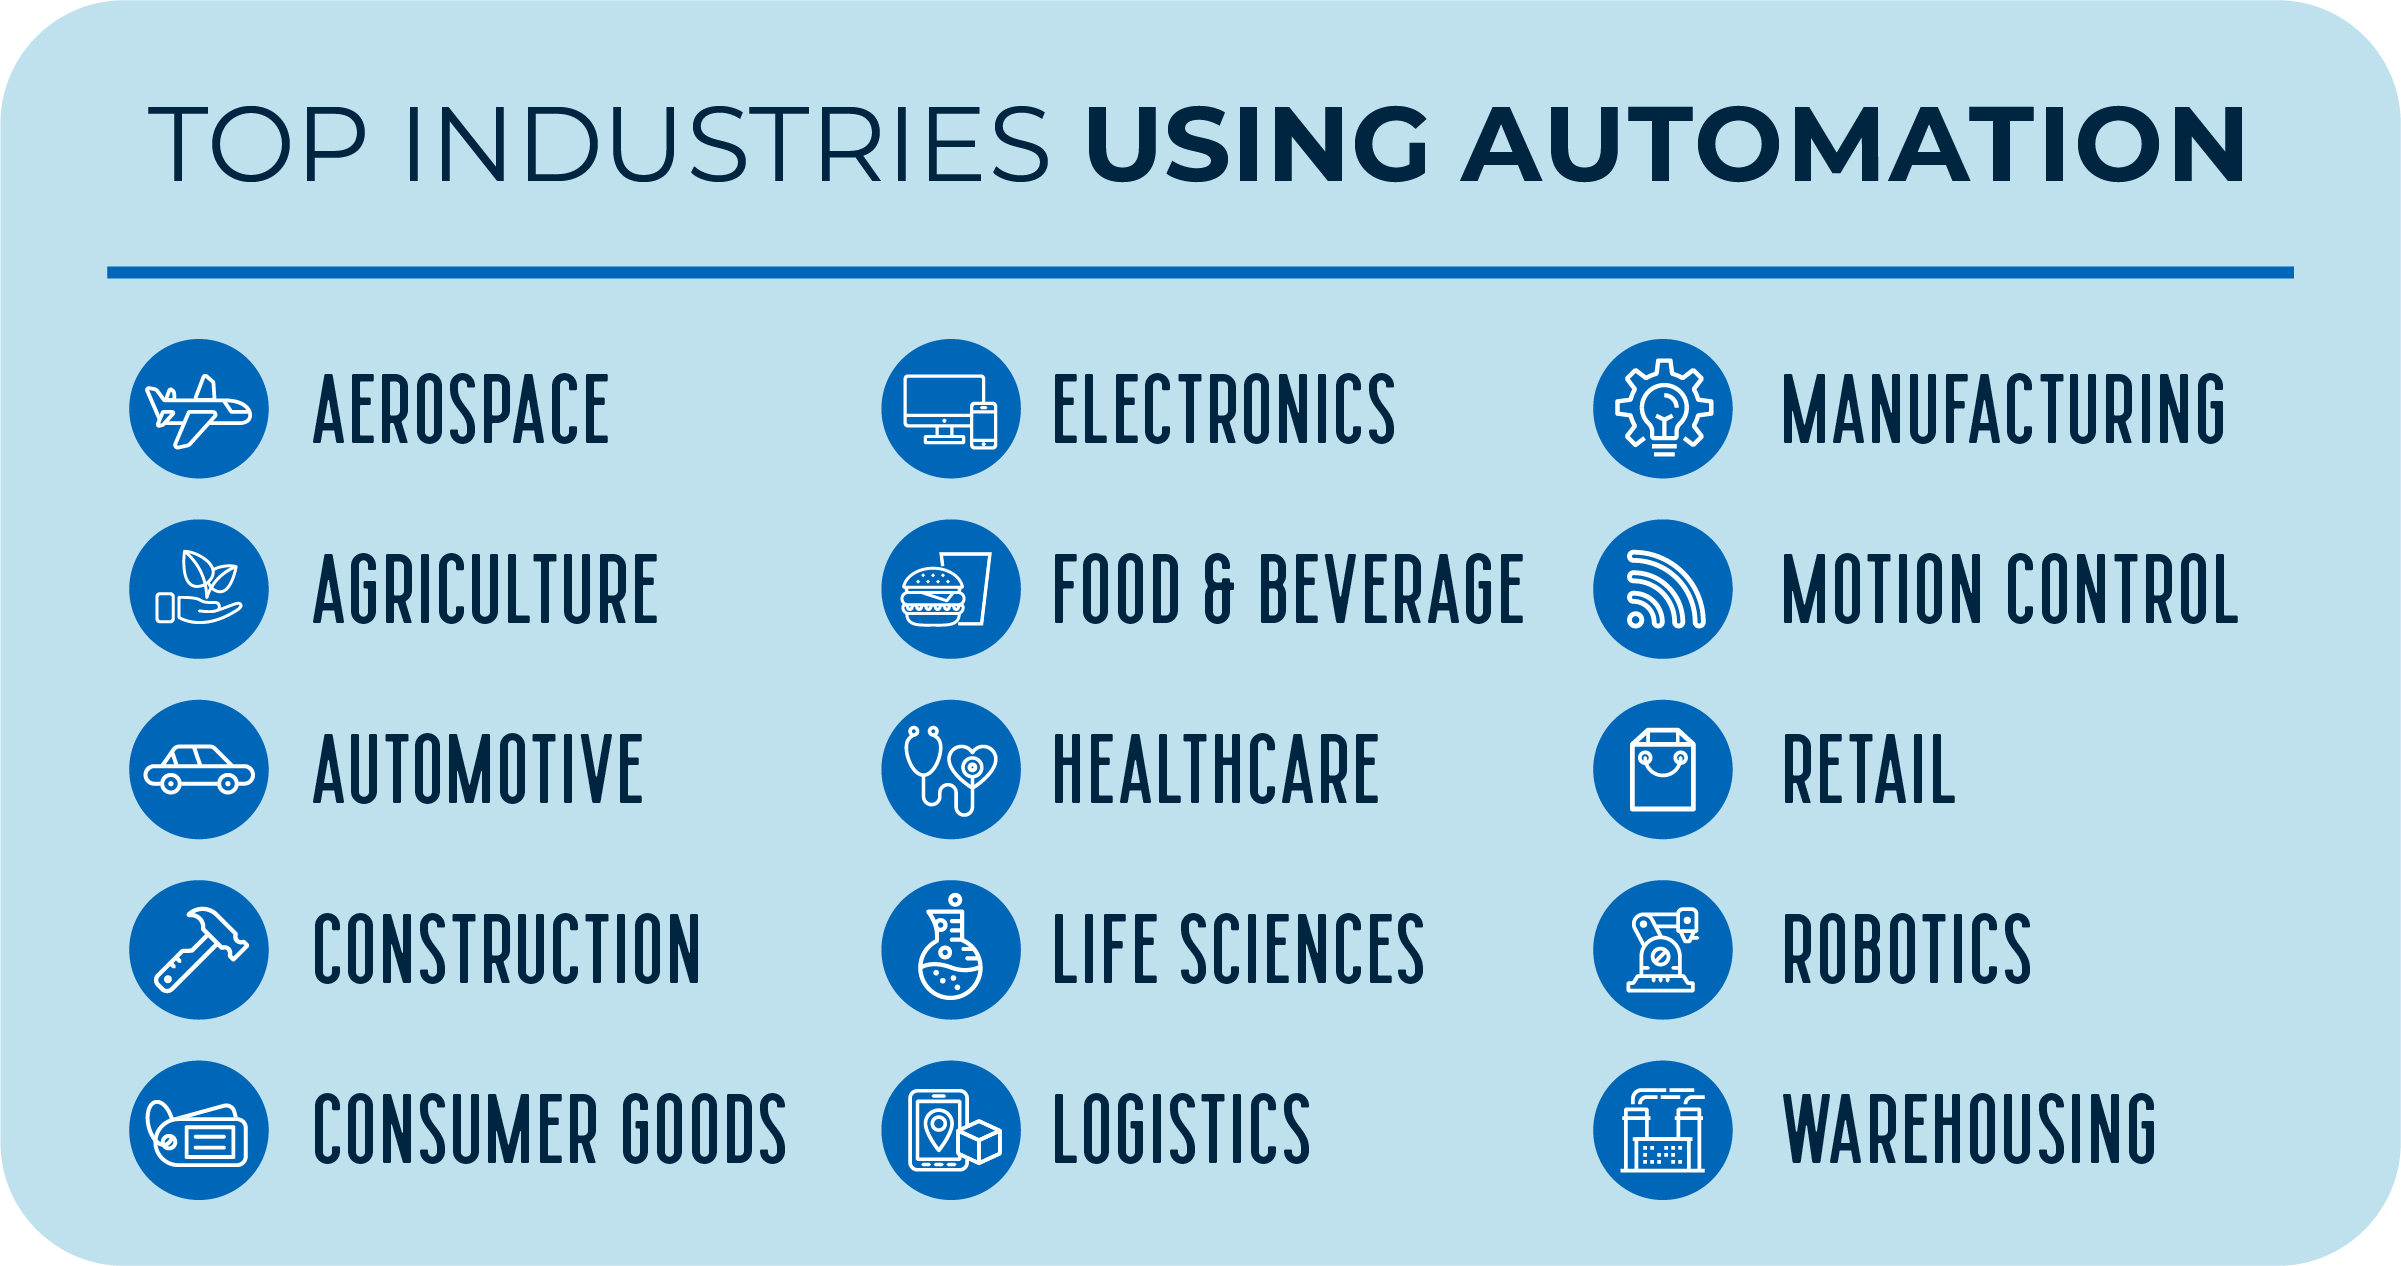 Top Industries Using Automation